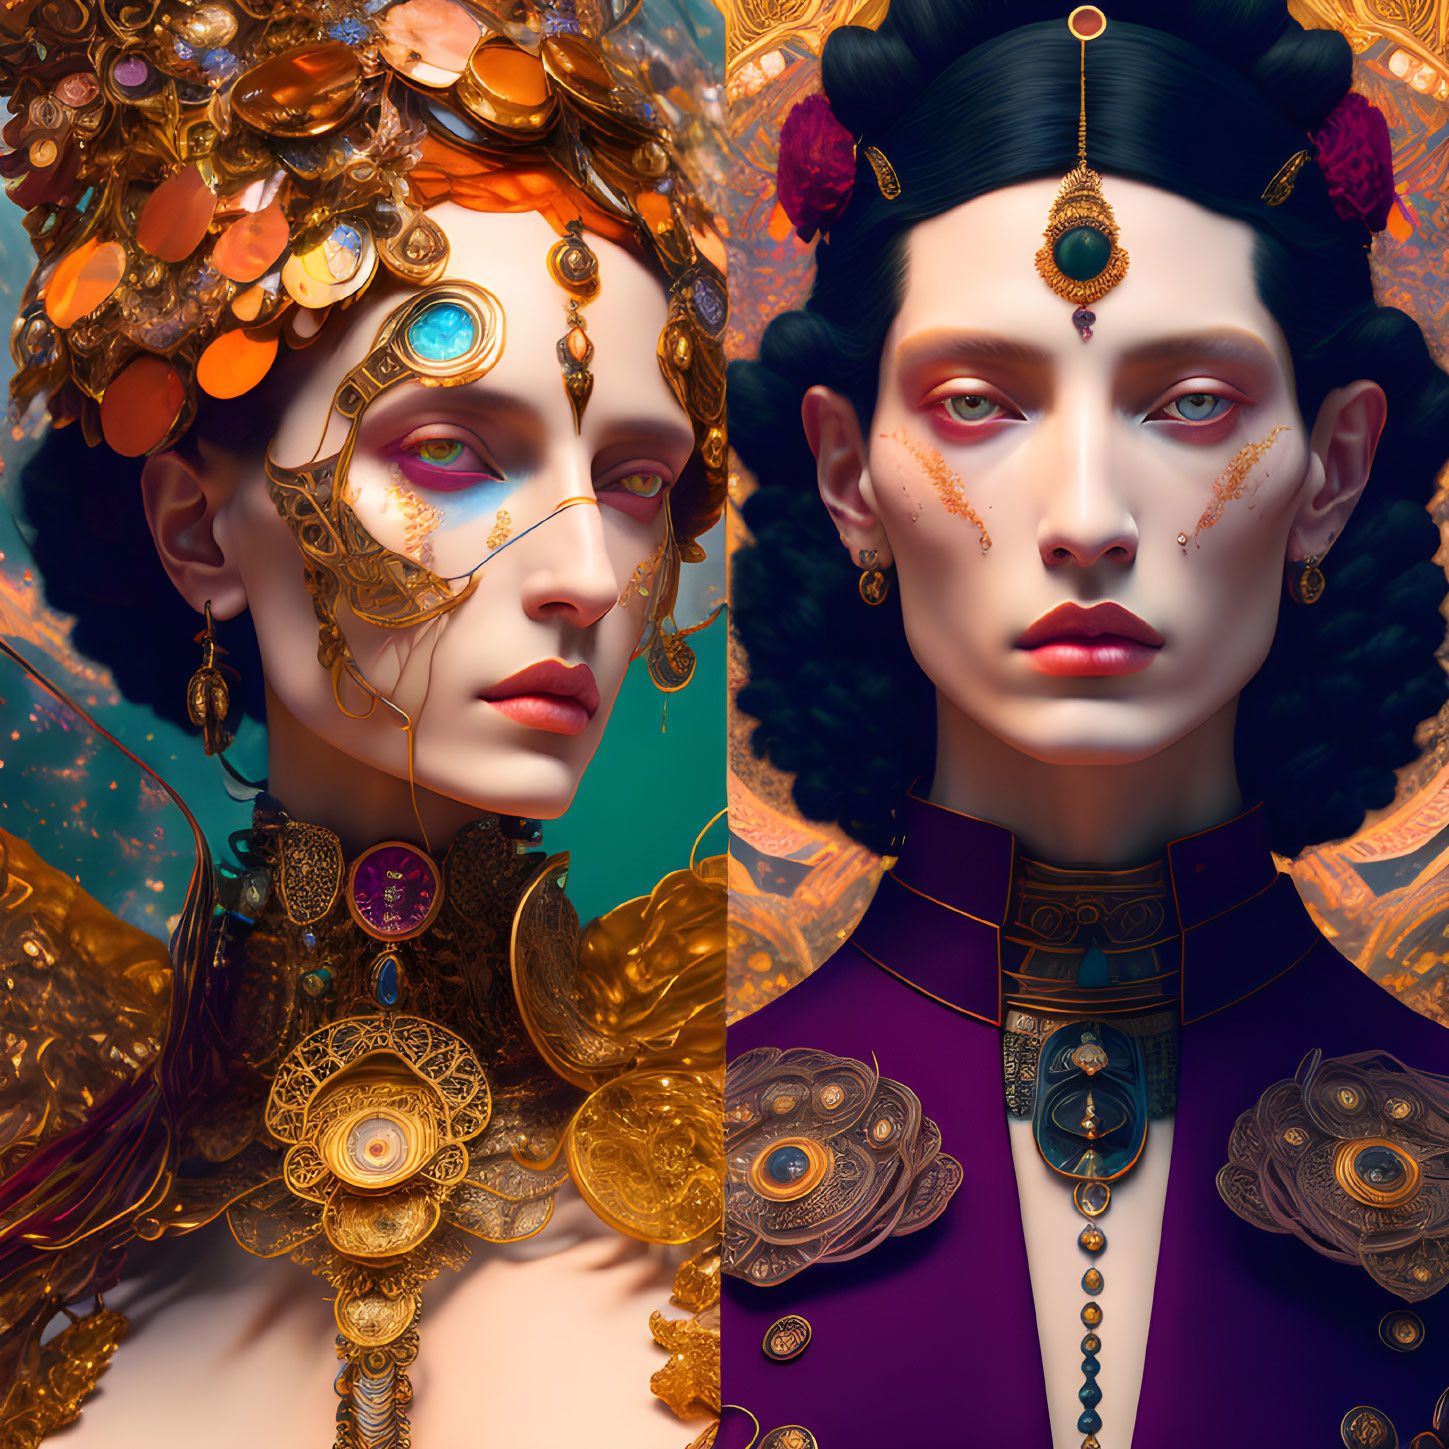 Stylized portraits of women with golden jewelry and makeup on vibrant background